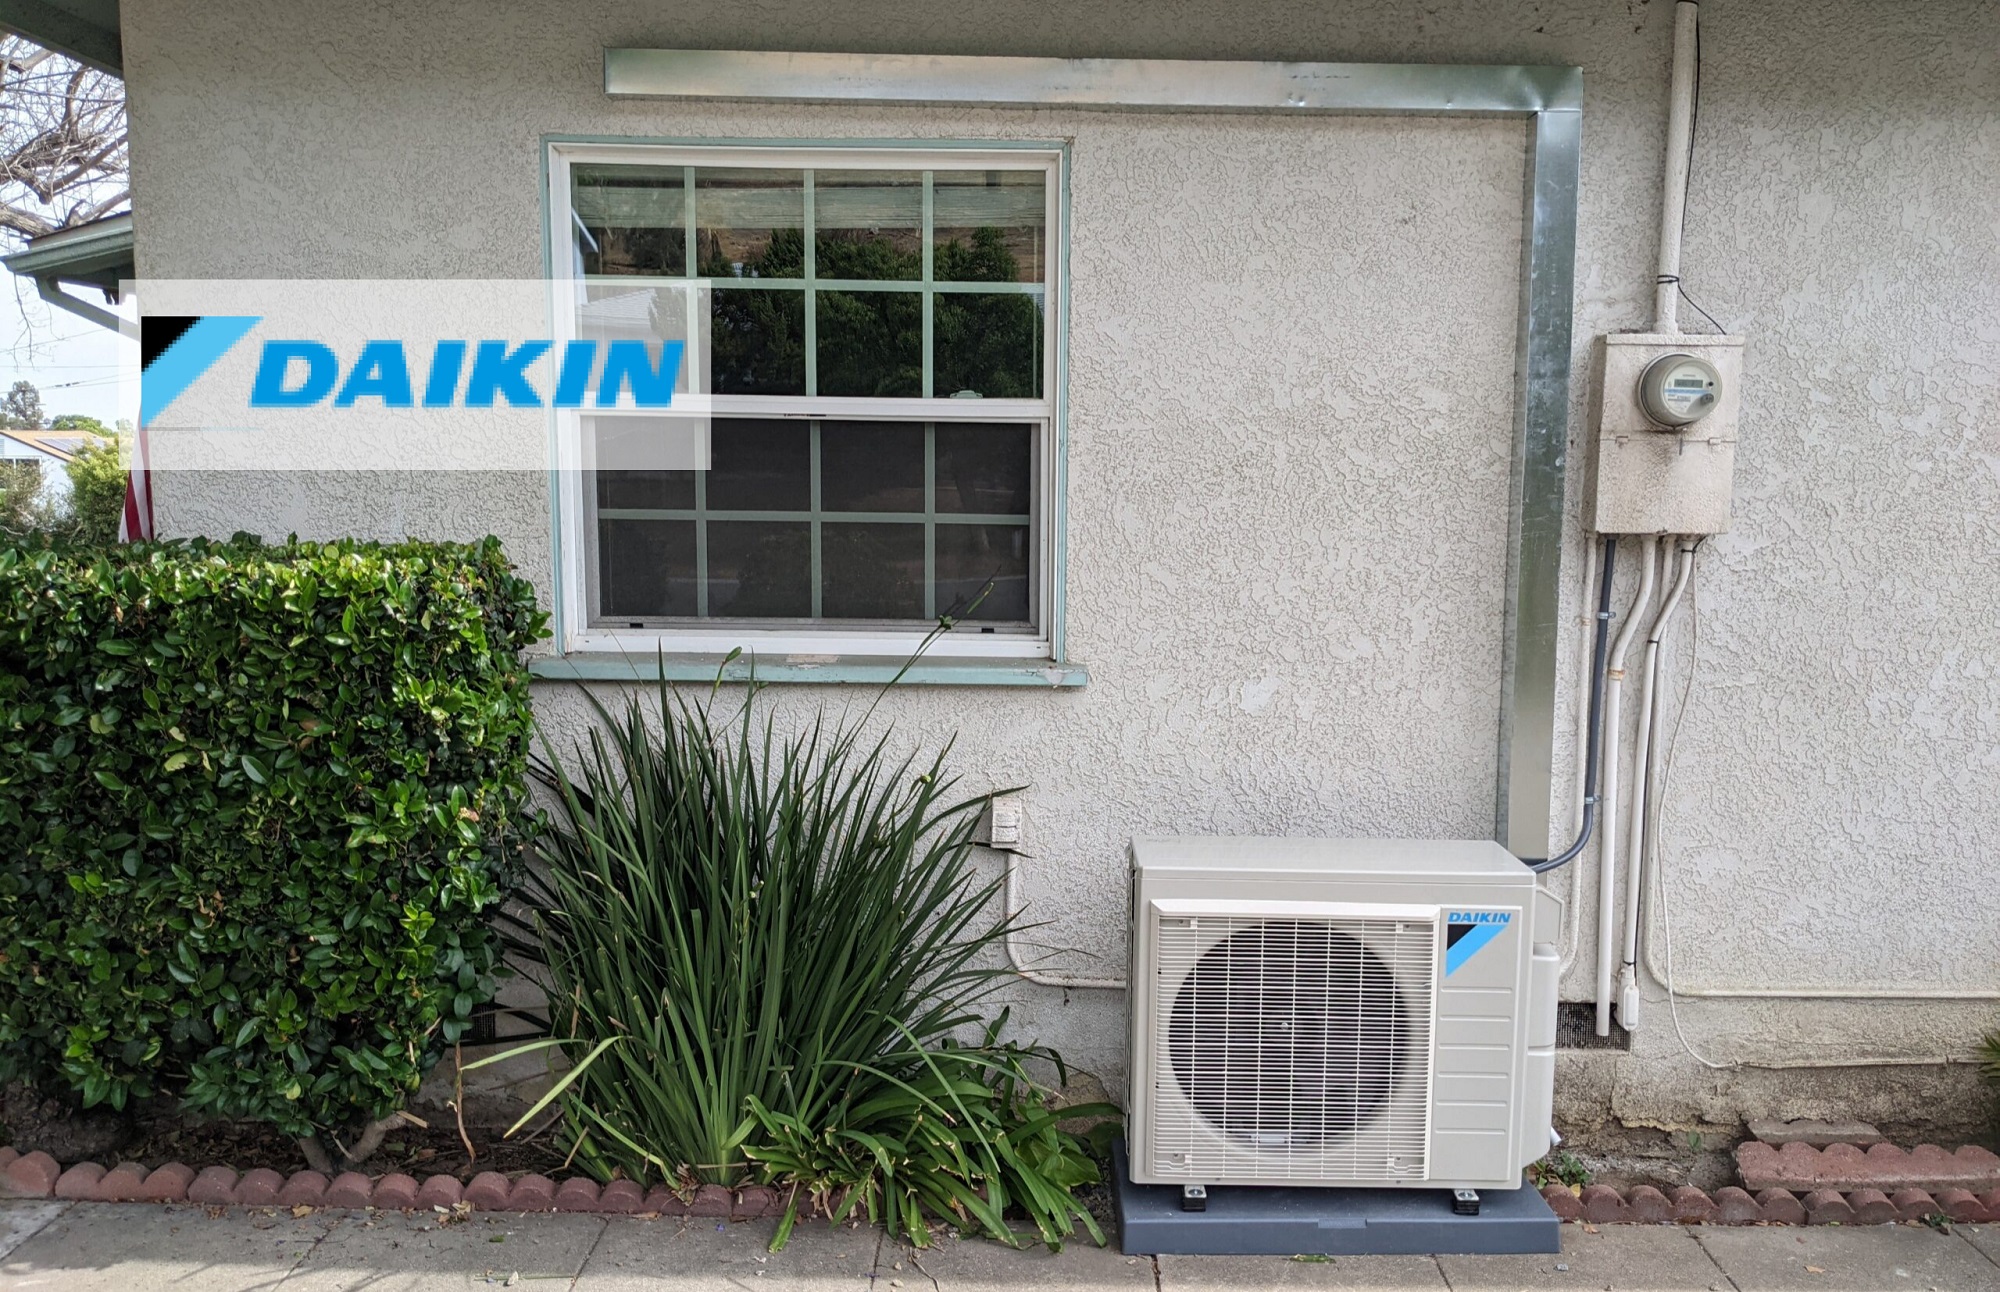 Daikin Mini Split Air Conditioner outside unit installed by Accord Air in San Diego.